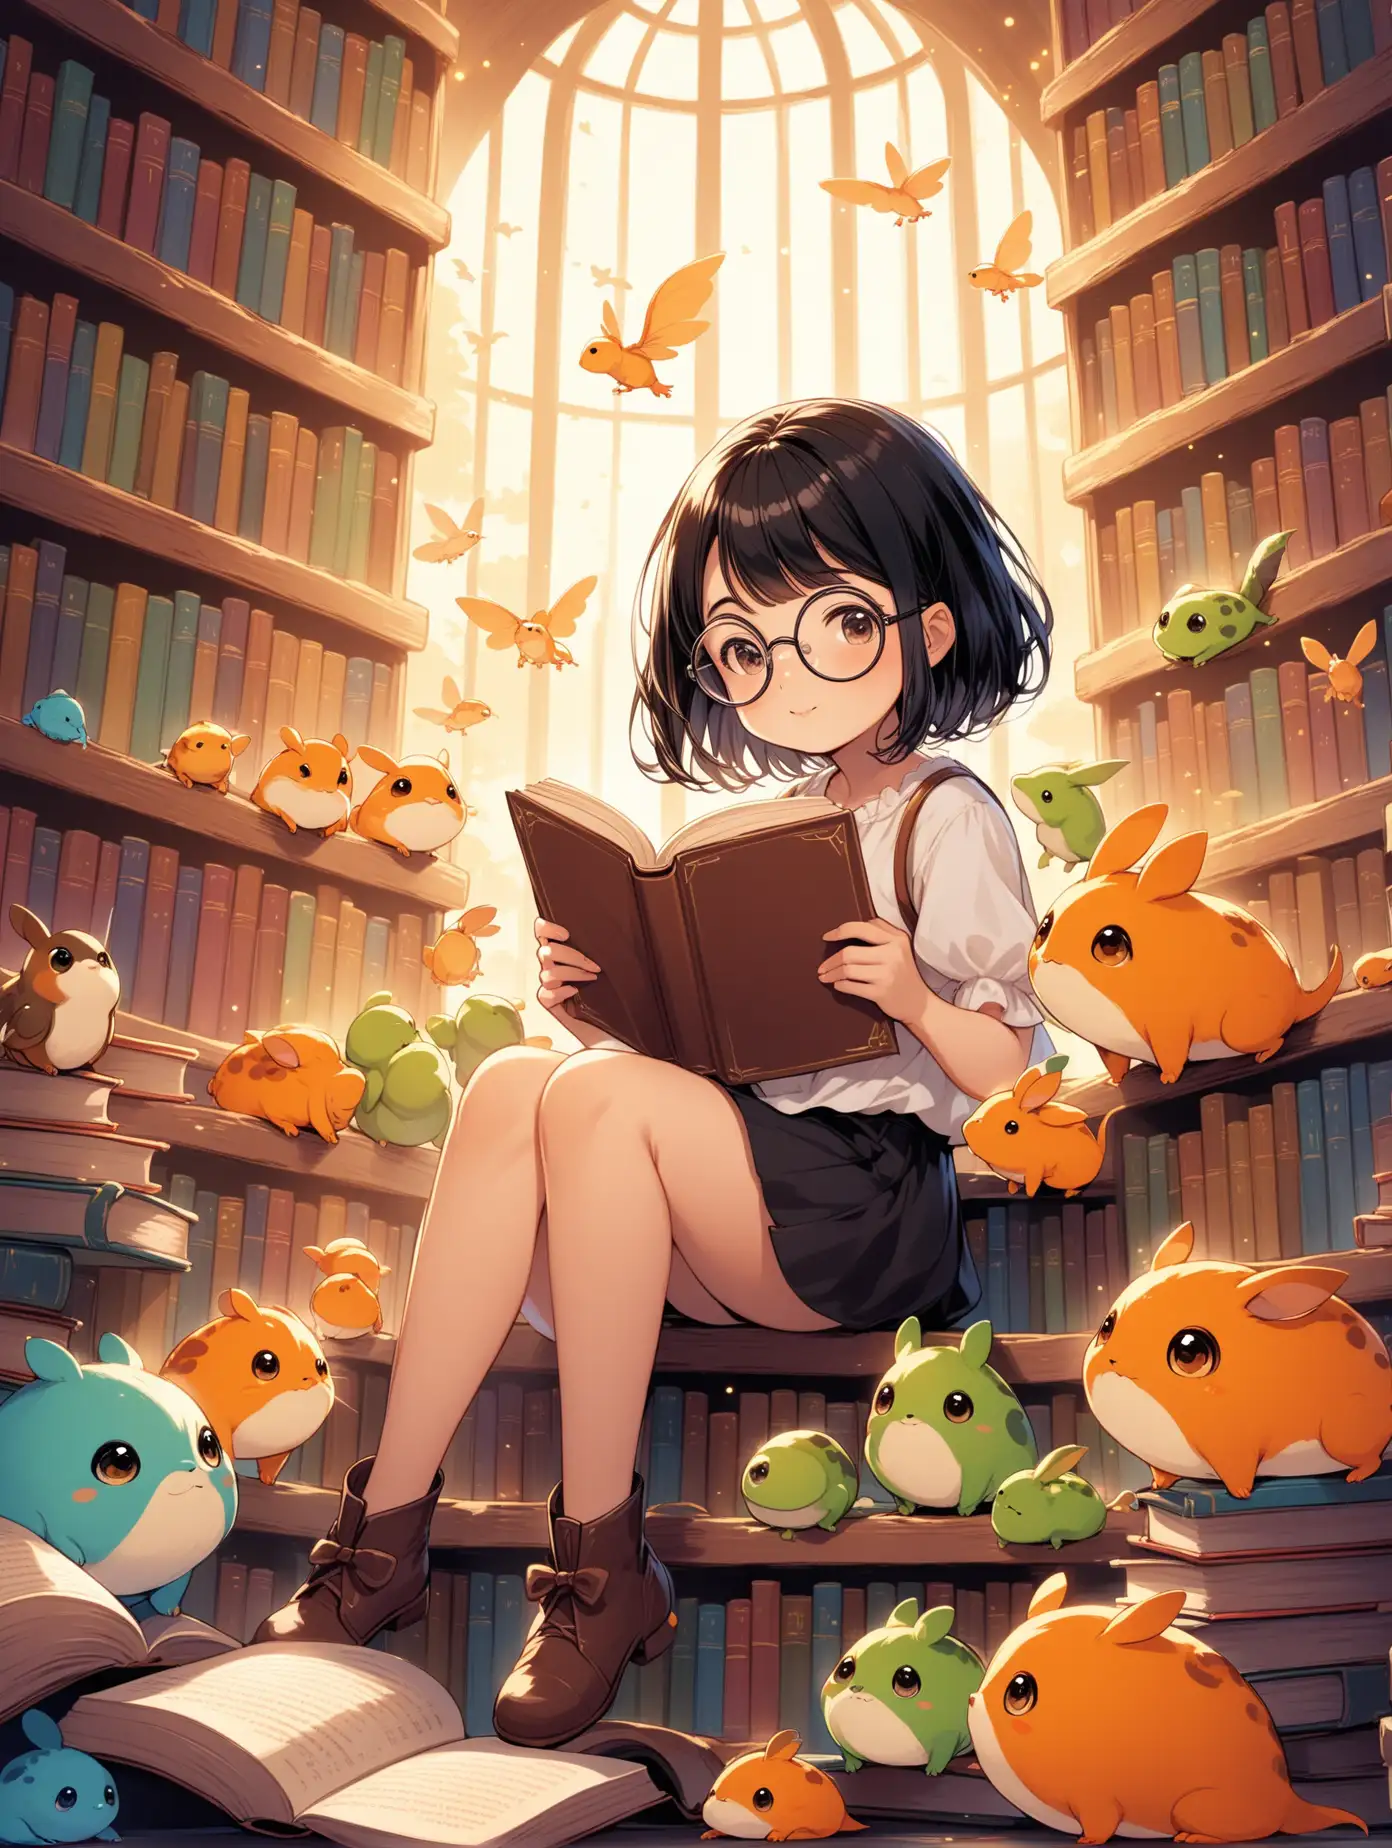 a cute little cartoon girl wearing big round glasses, black short hair, surrounded by little creatures, reading a book, and sitting on different books in a fantasy library